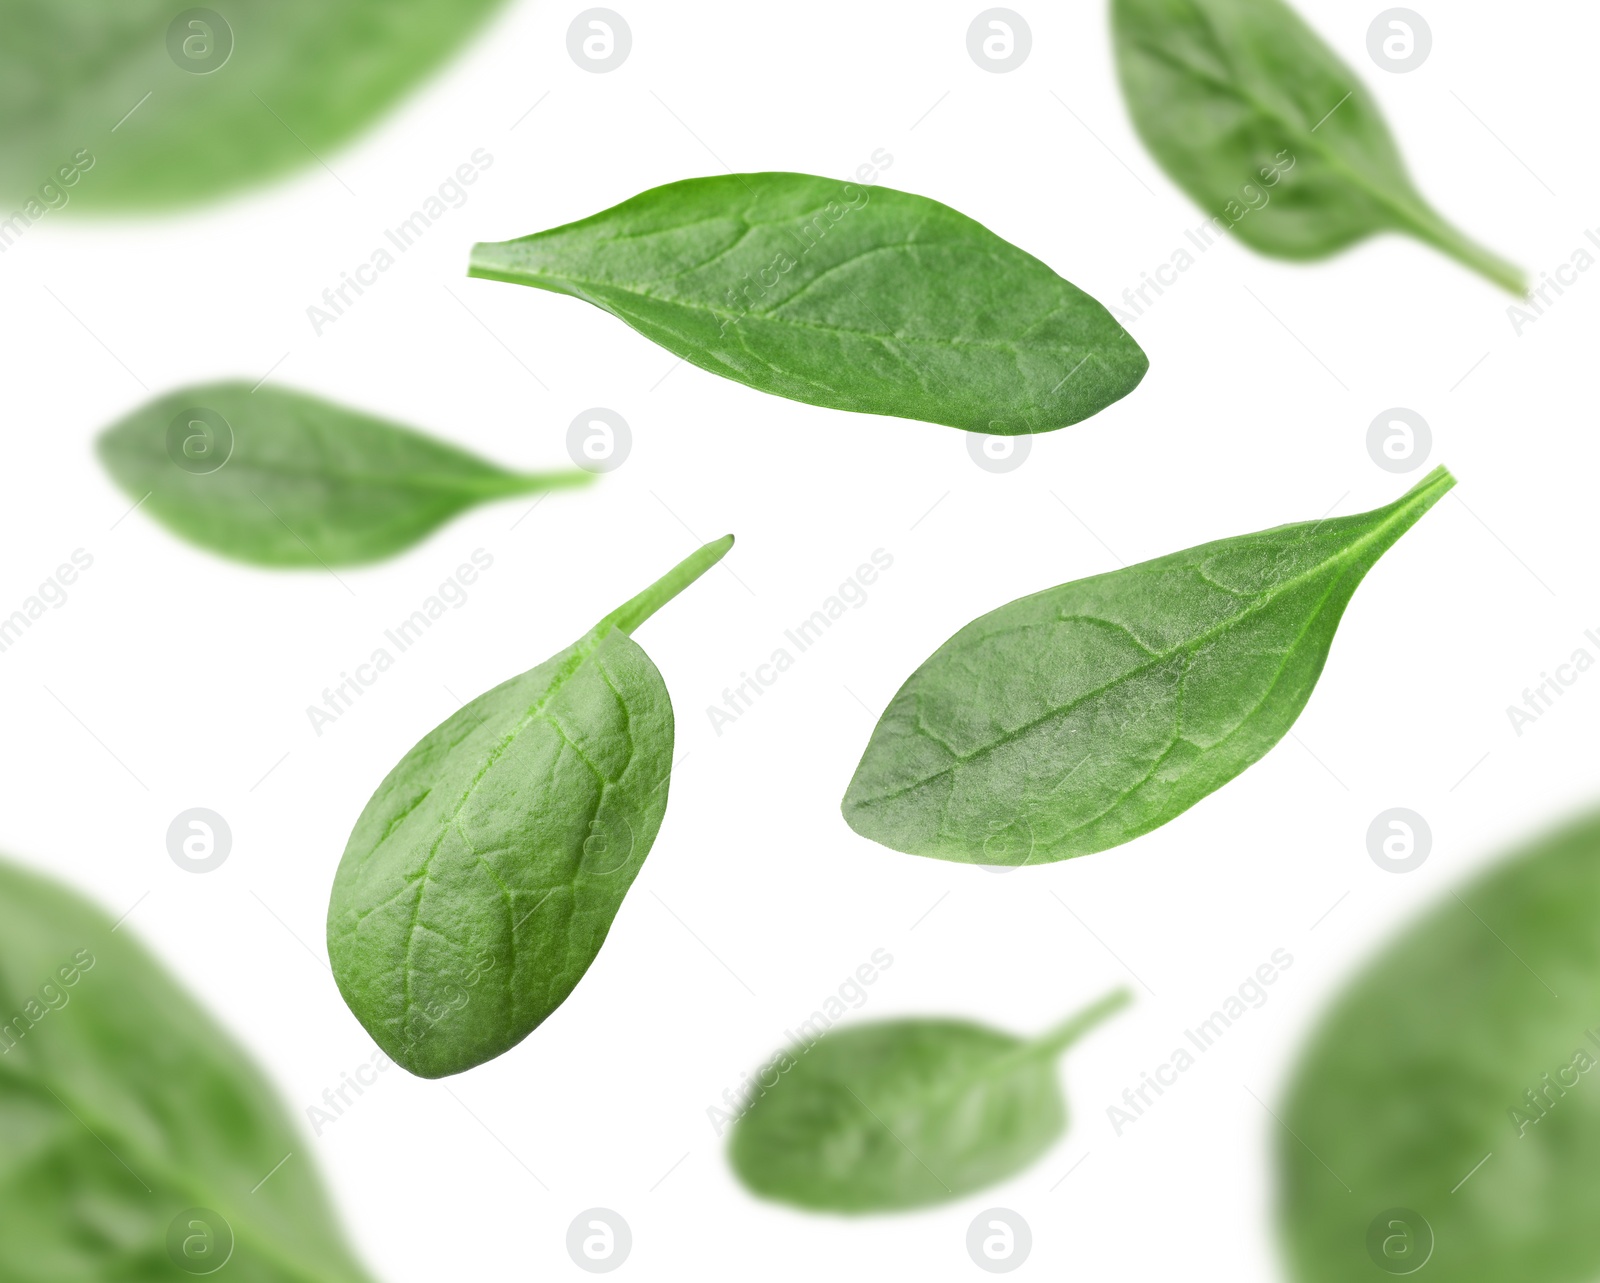 Image of Fresh green spinach leaves falling on white background